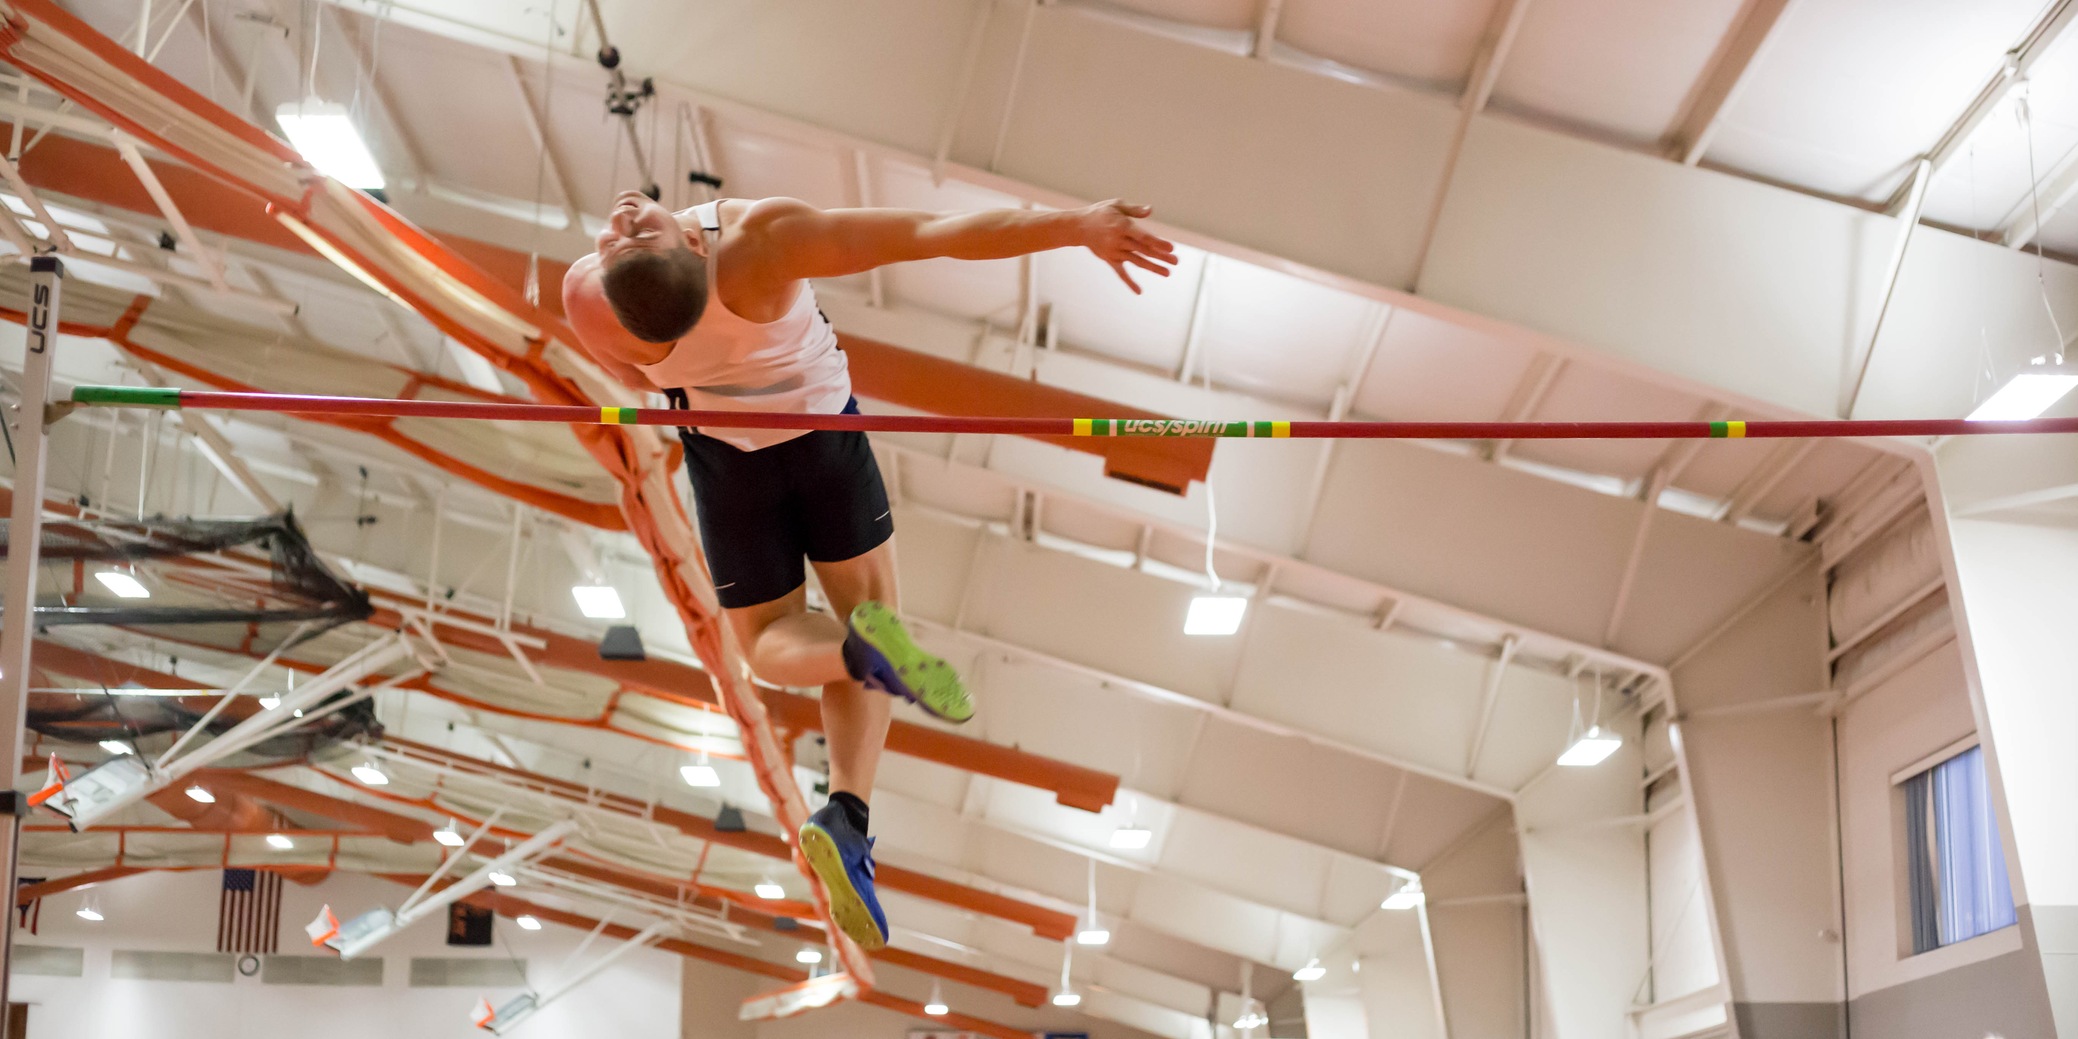 Oilers Post Solid Marks at Jesse Owens Classic